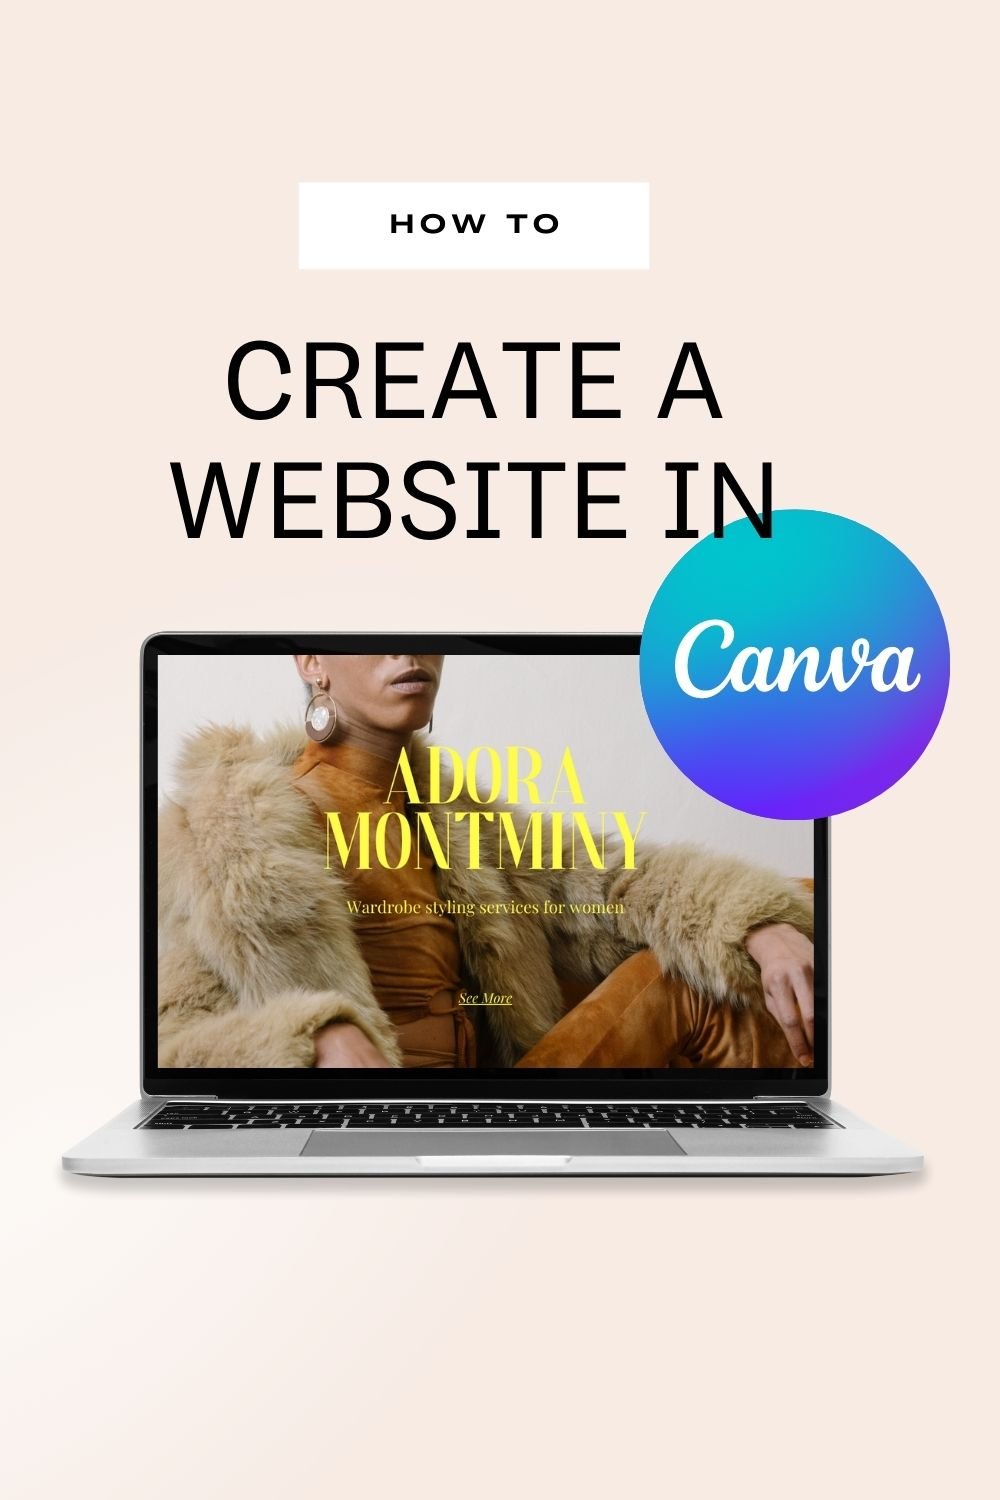 How to Make a Website Using Canva ( Step by Step Tutorial )